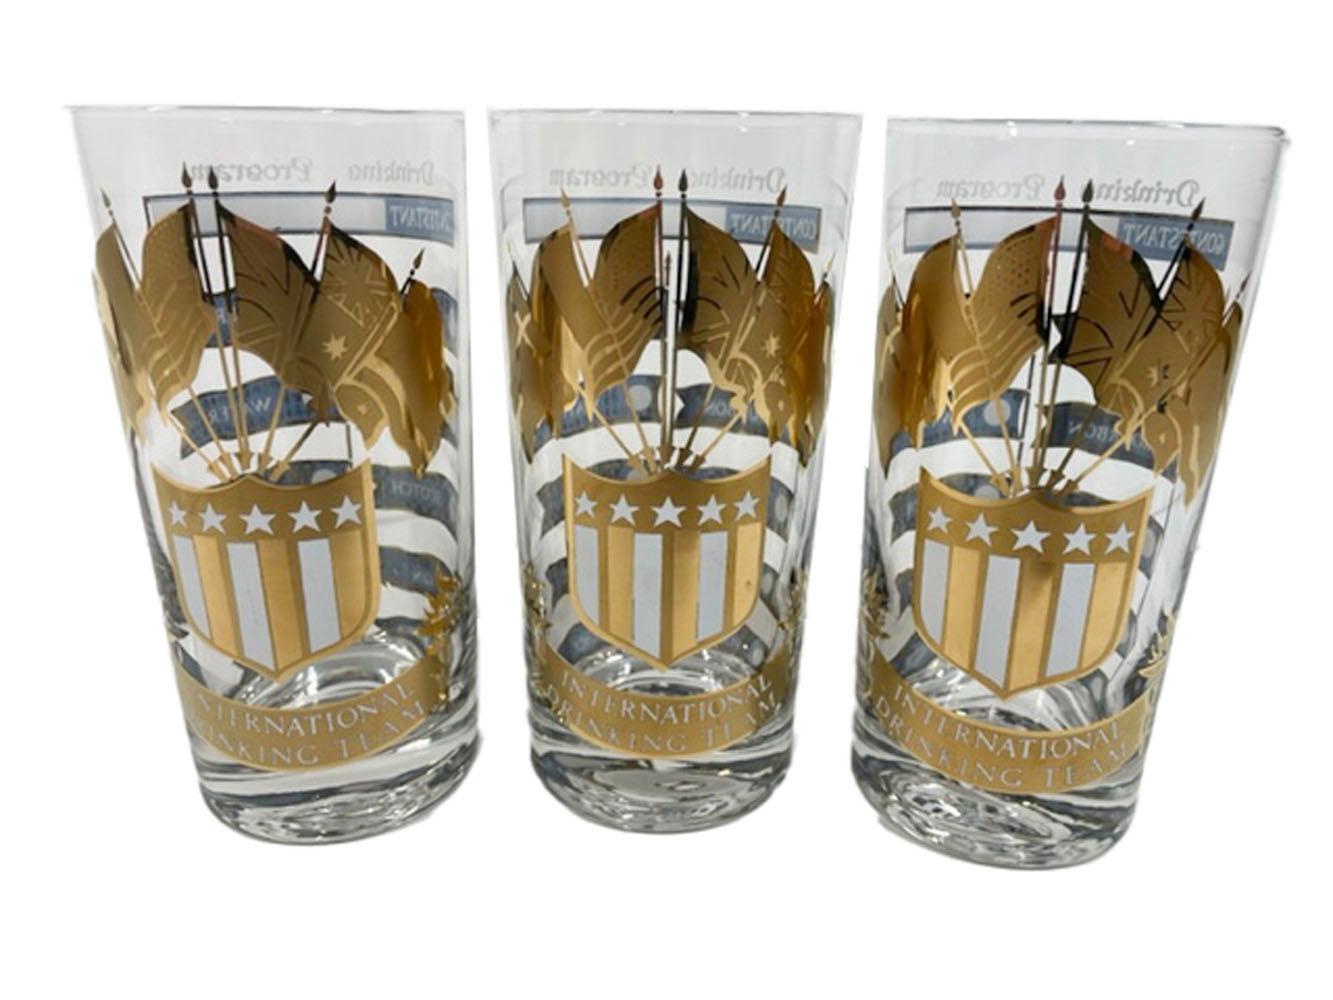 Rare, highball glasses by Culver, LTD. decorated in 22 karat gold with blue and white enamel, in the 'International Drinking Team' pattern. Each decorated on the front with a shield holding five flags above a banner with the words 'International